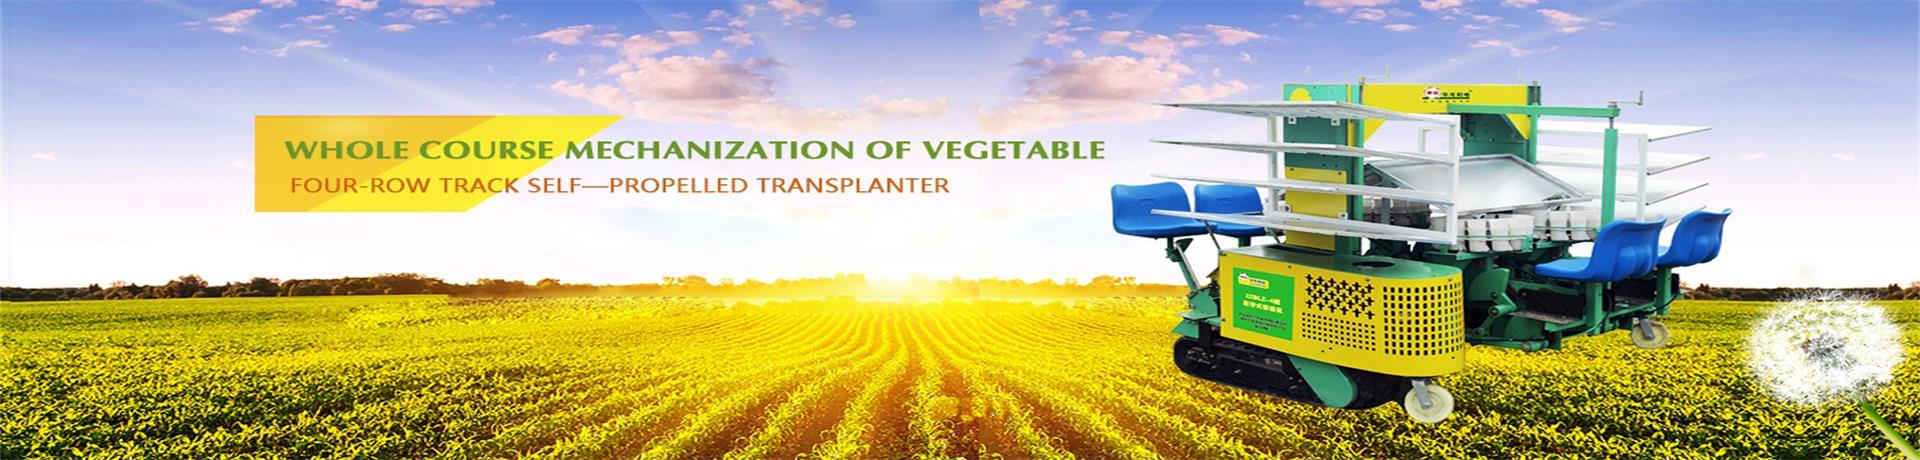 Whole Course Mechanization of Vegetable